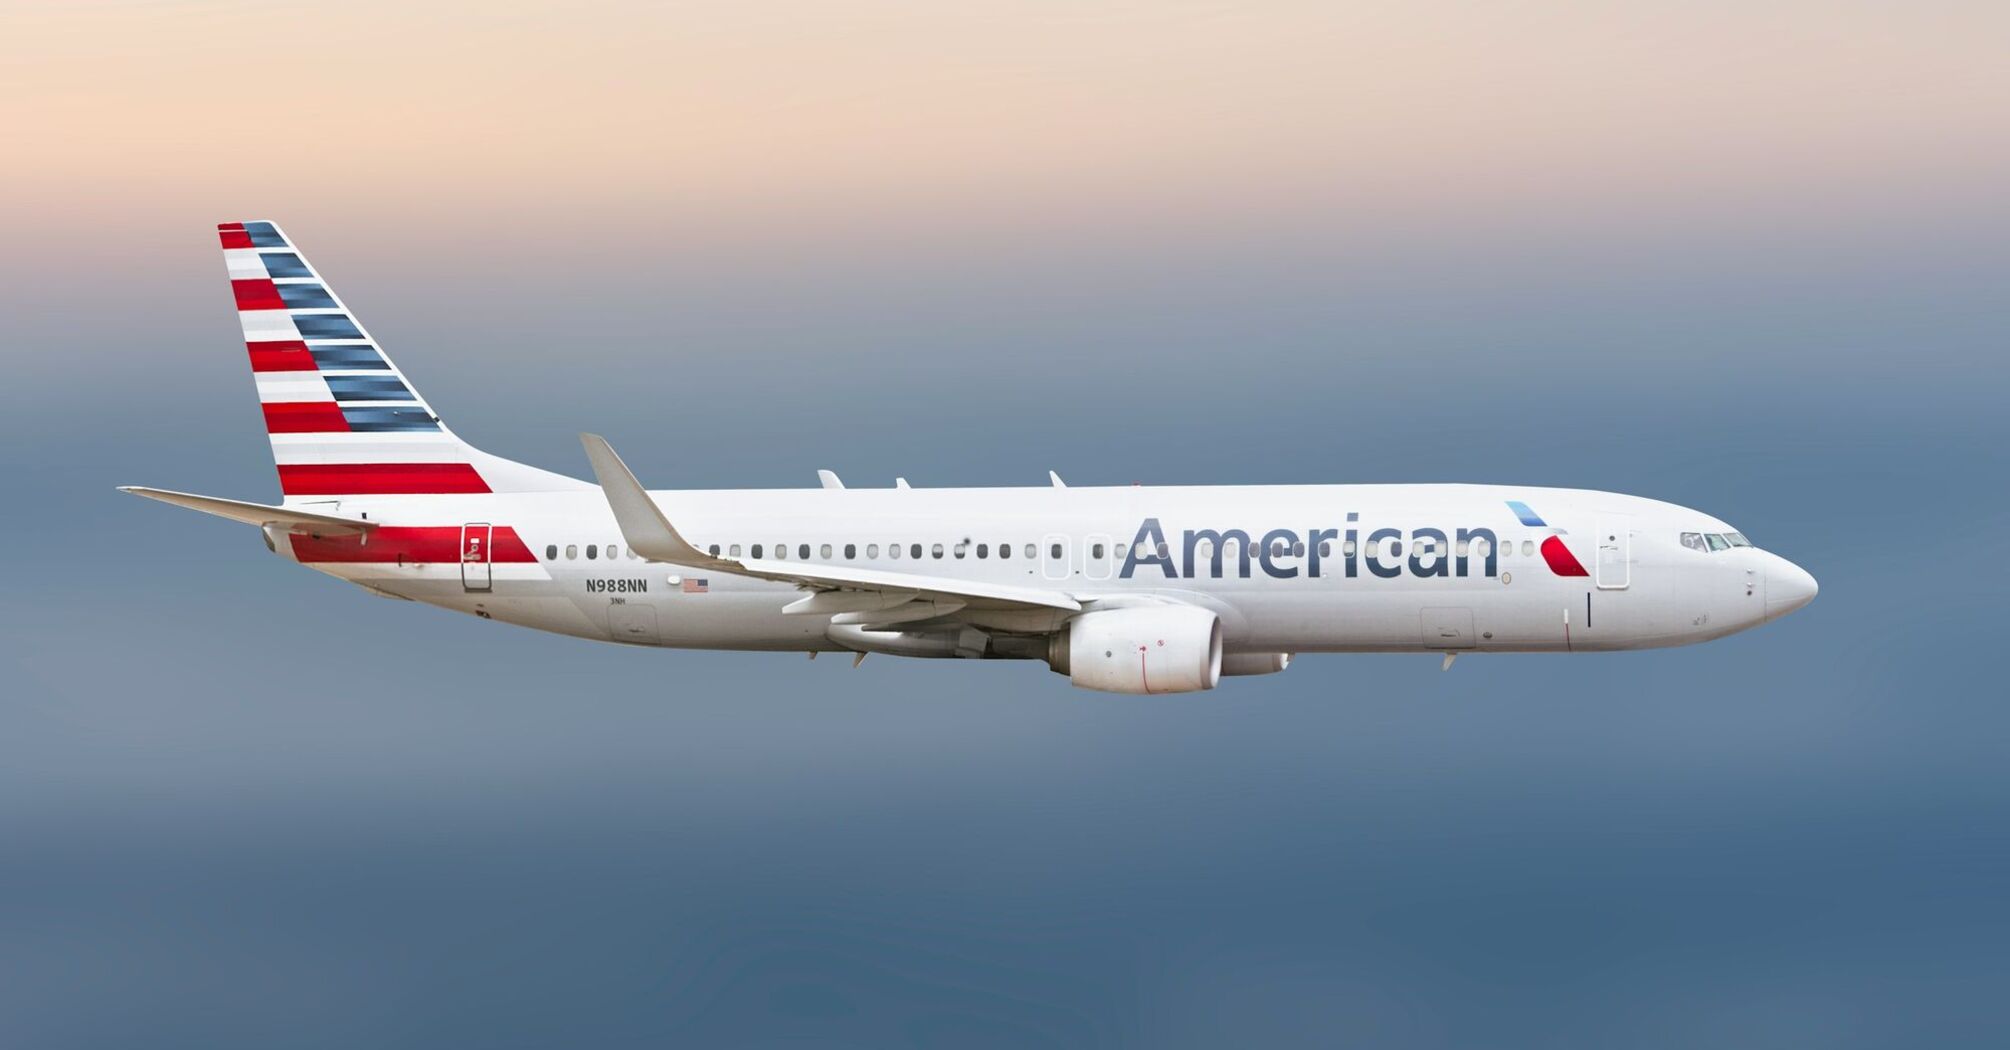 American Airline’s Boeing 738 in the air